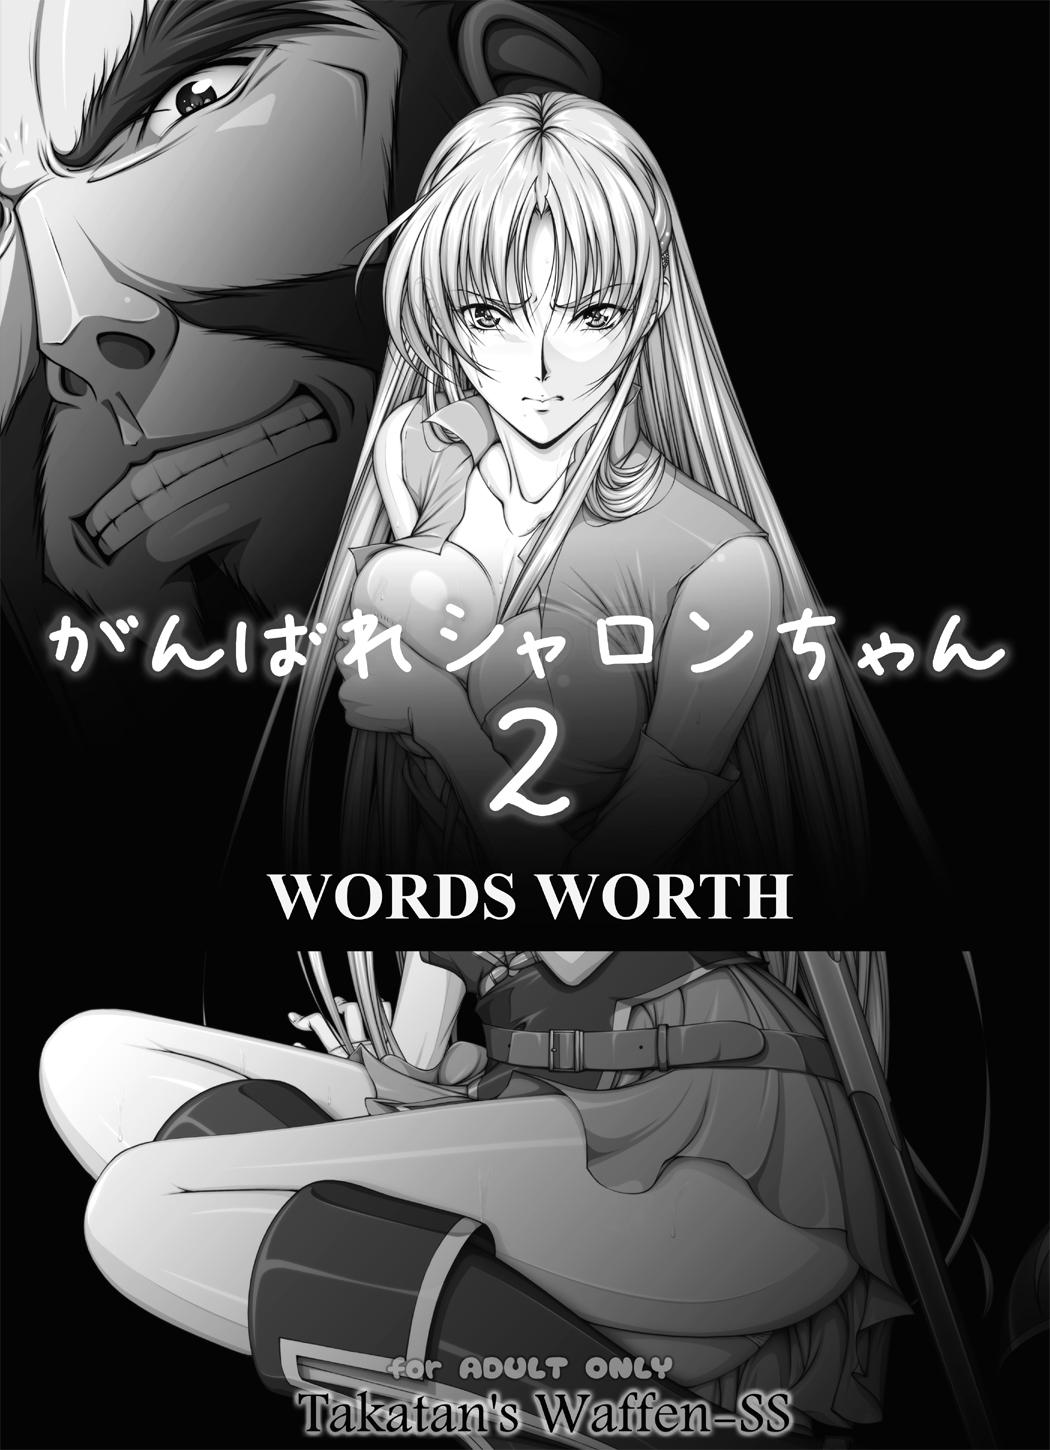 Free Real Porn [Takatan's Waffen-SS] Fight, Sharon! 2 [Deluxe Edition] (Words Worth) +omake - Words worth Cumshots - Page 8